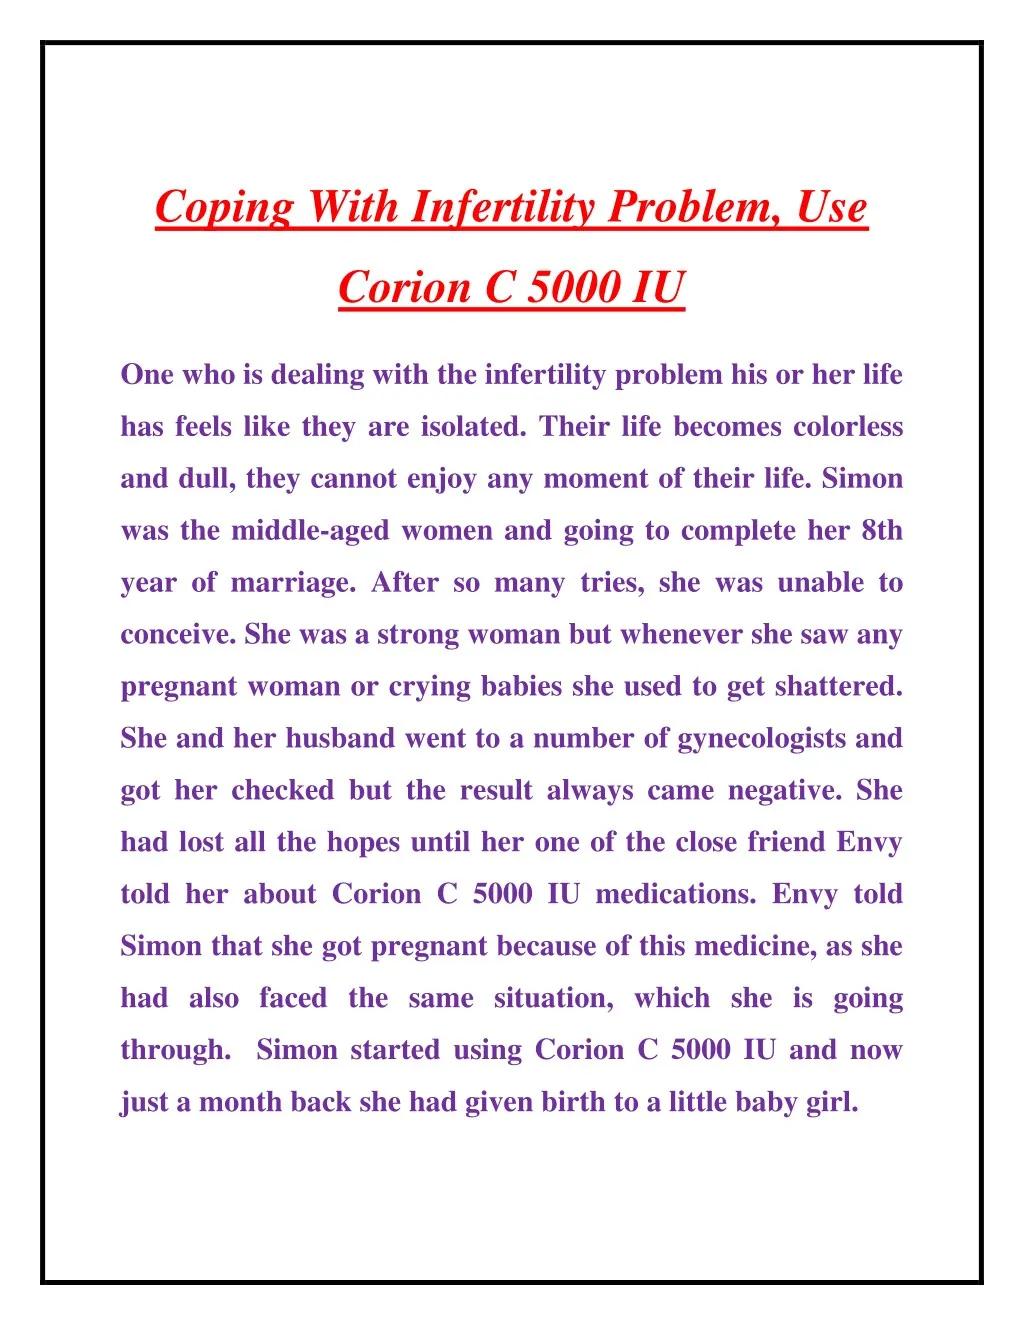 coping with infertility problem use